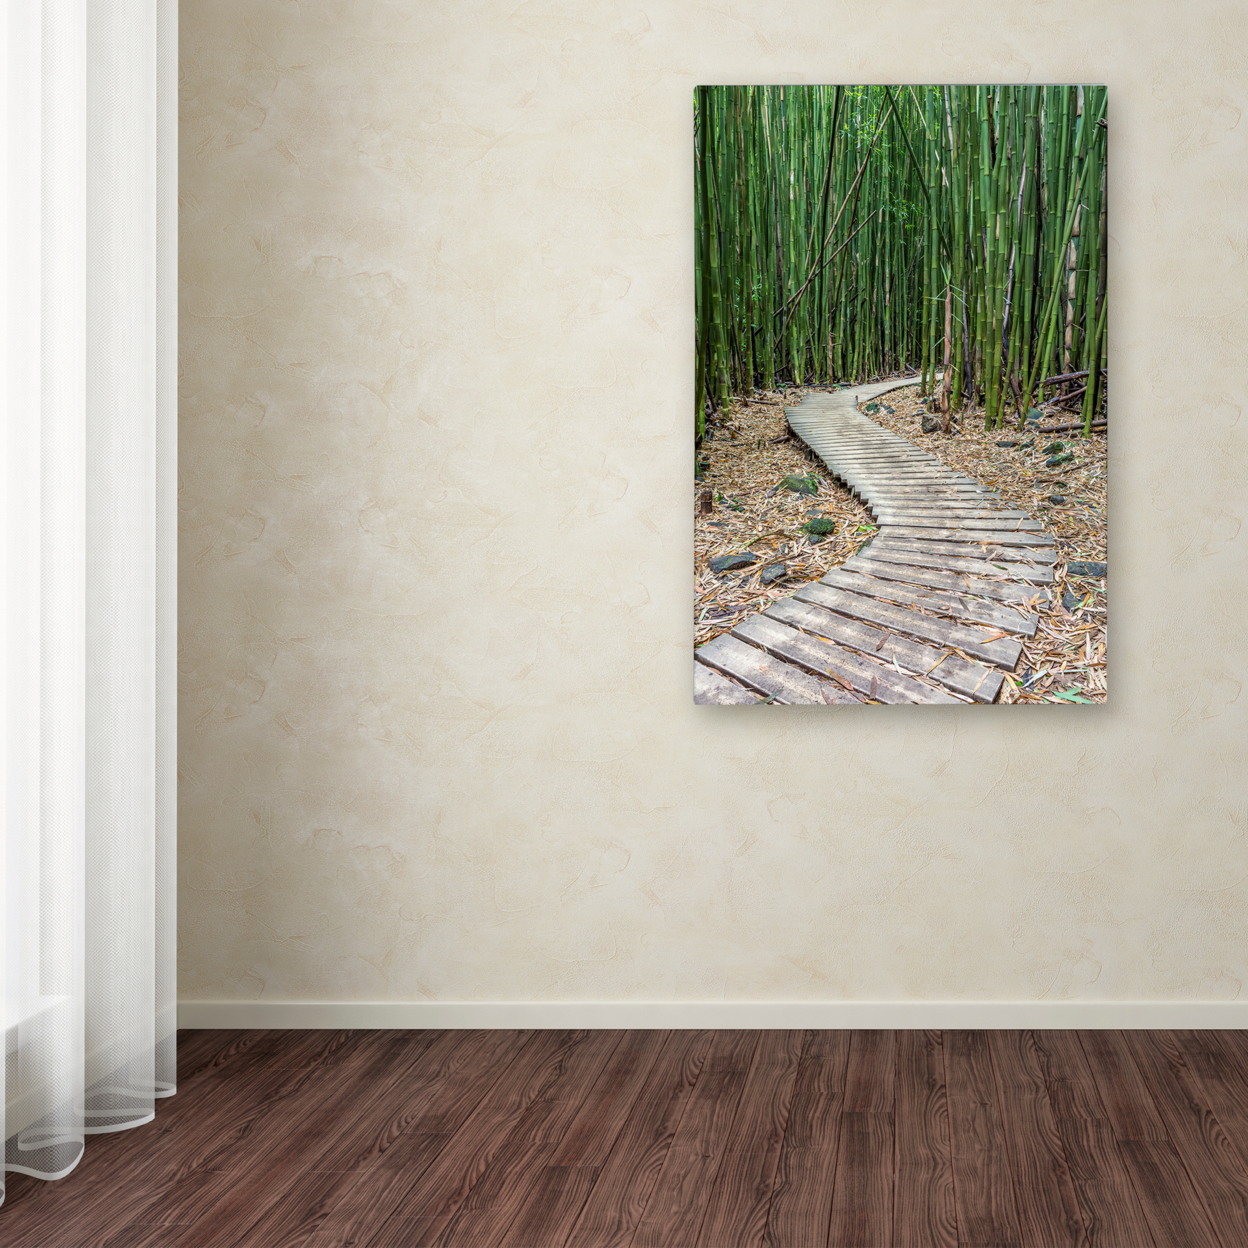 Pierre Leclerc 'Hiking Through The Bamboo Forest' Canvas Art 16 X 24